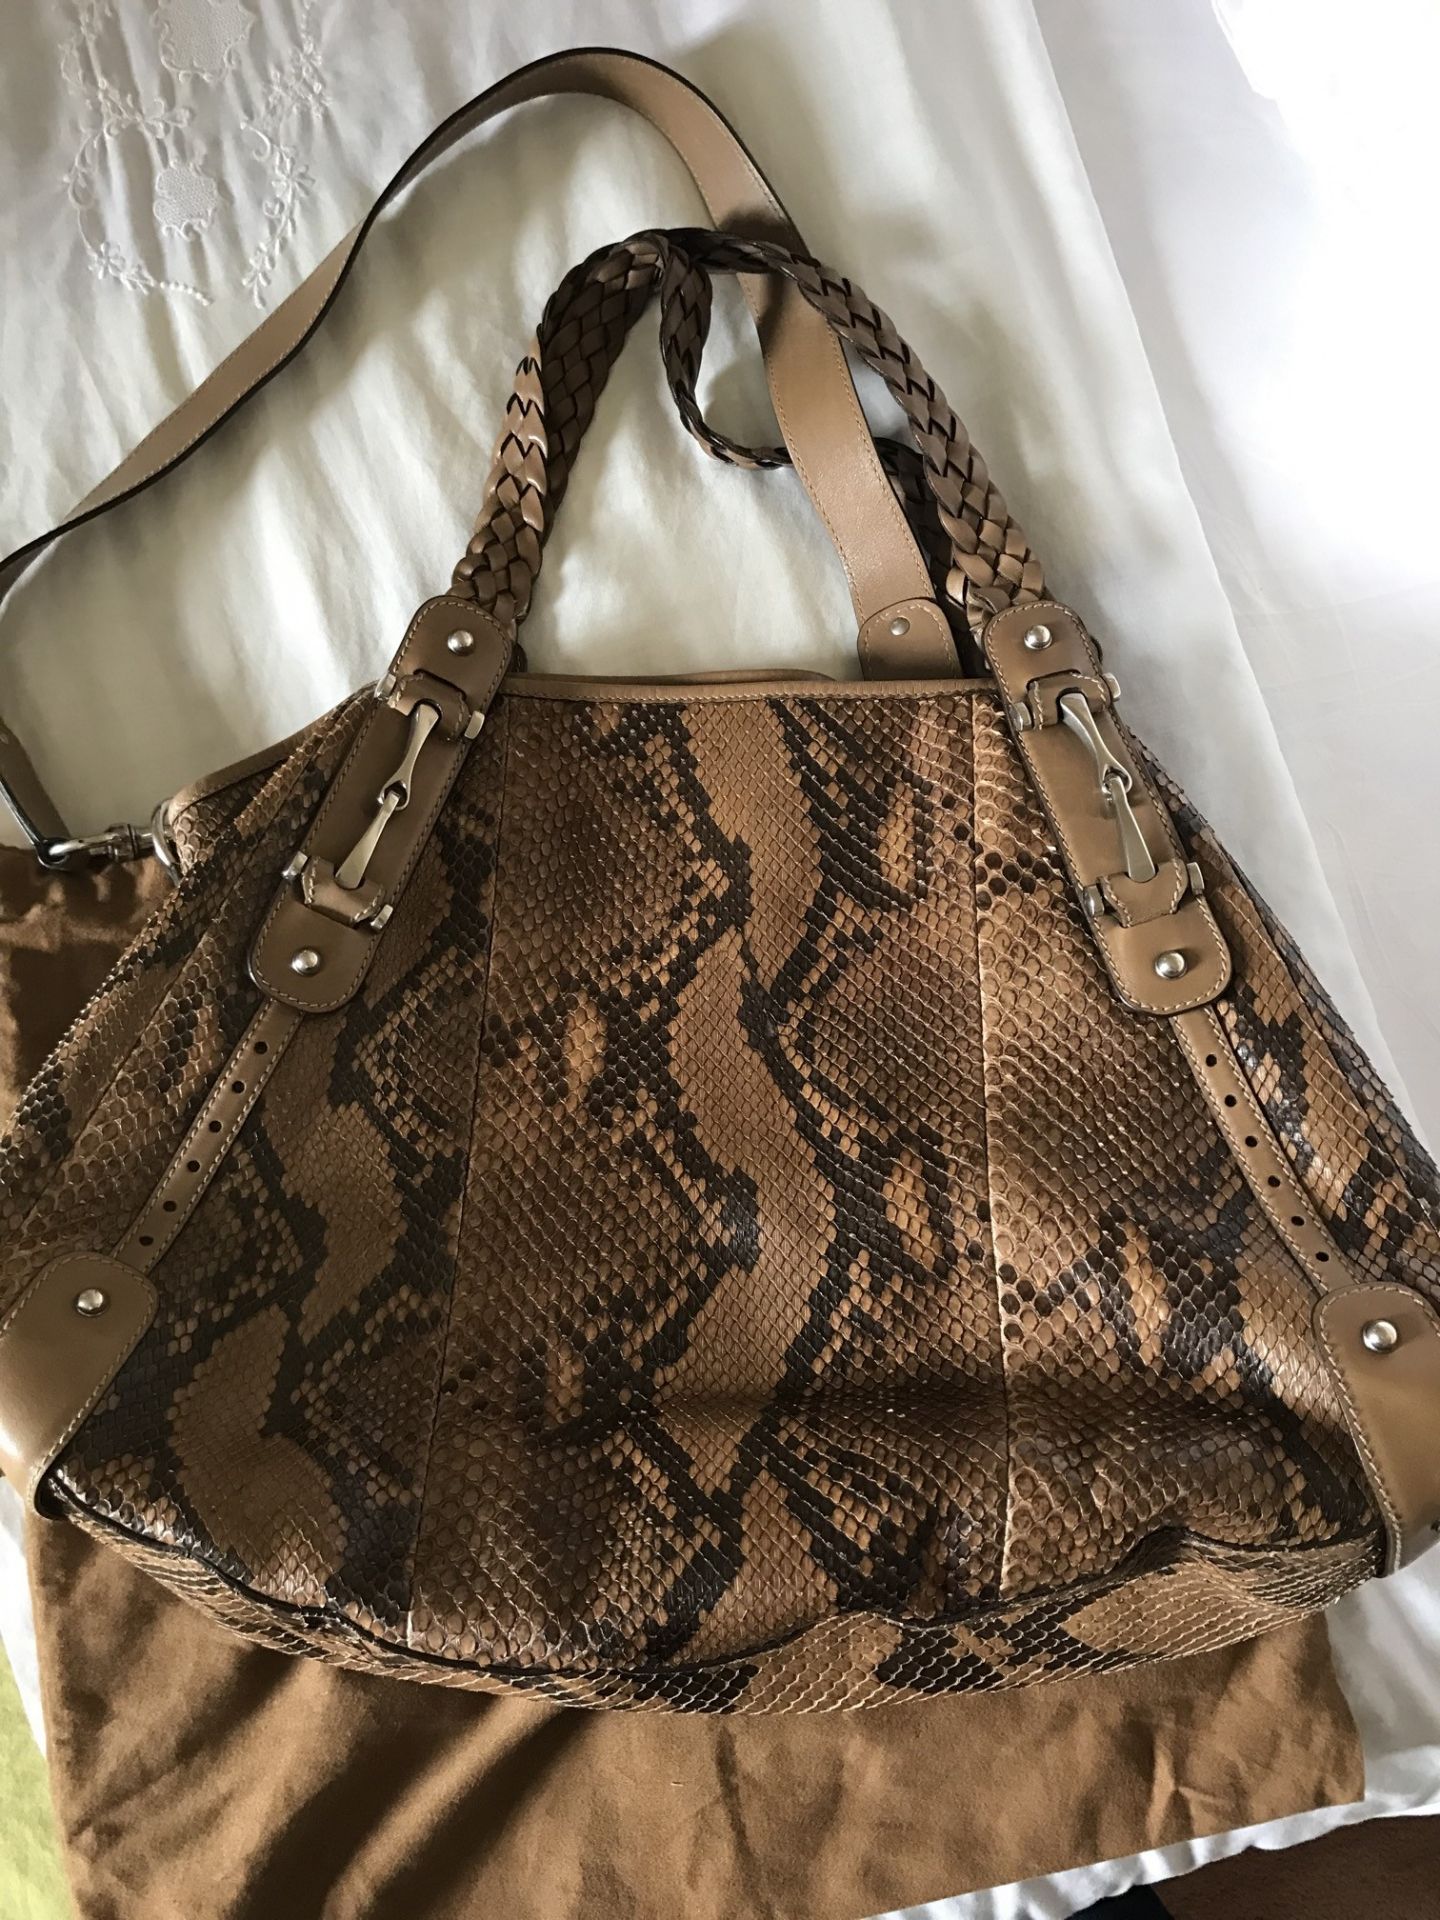 RARE GUCCI SNAKESKIN HANDBAG WITH DUSTBAG IN GREAT CONDITION